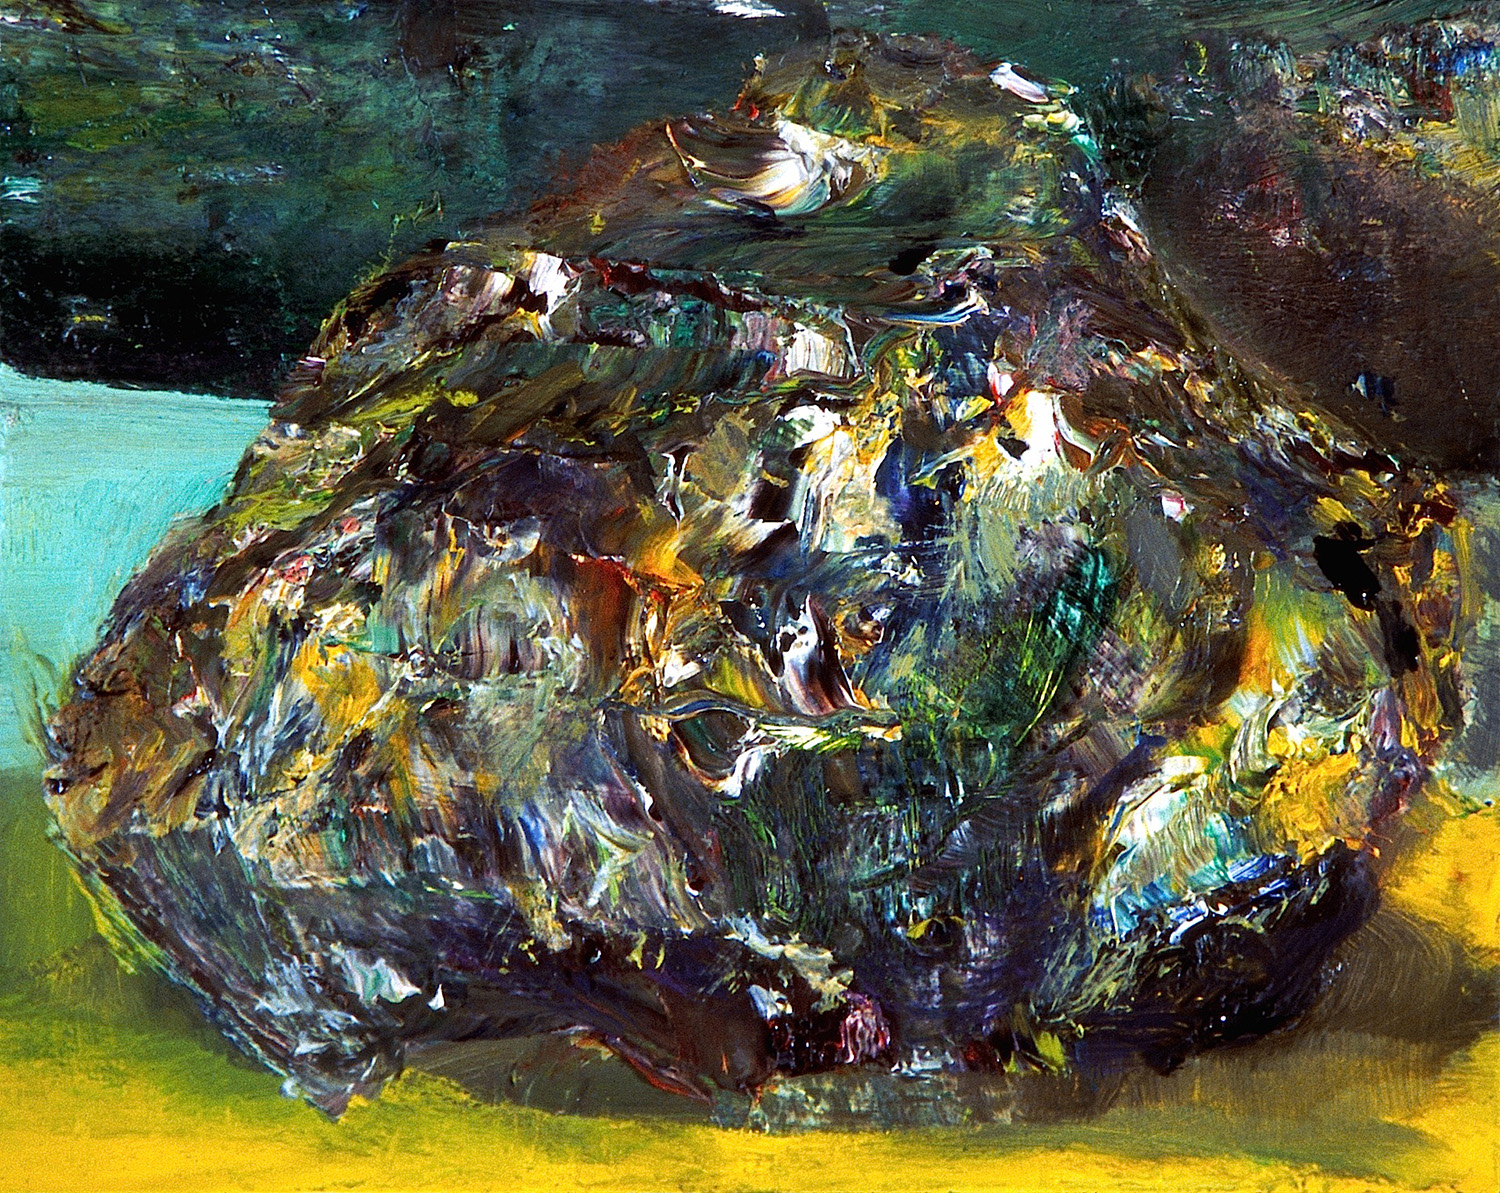   This Rock Contains All the Known Elements , 2004, oil on canvas, 8 x 10 inches 